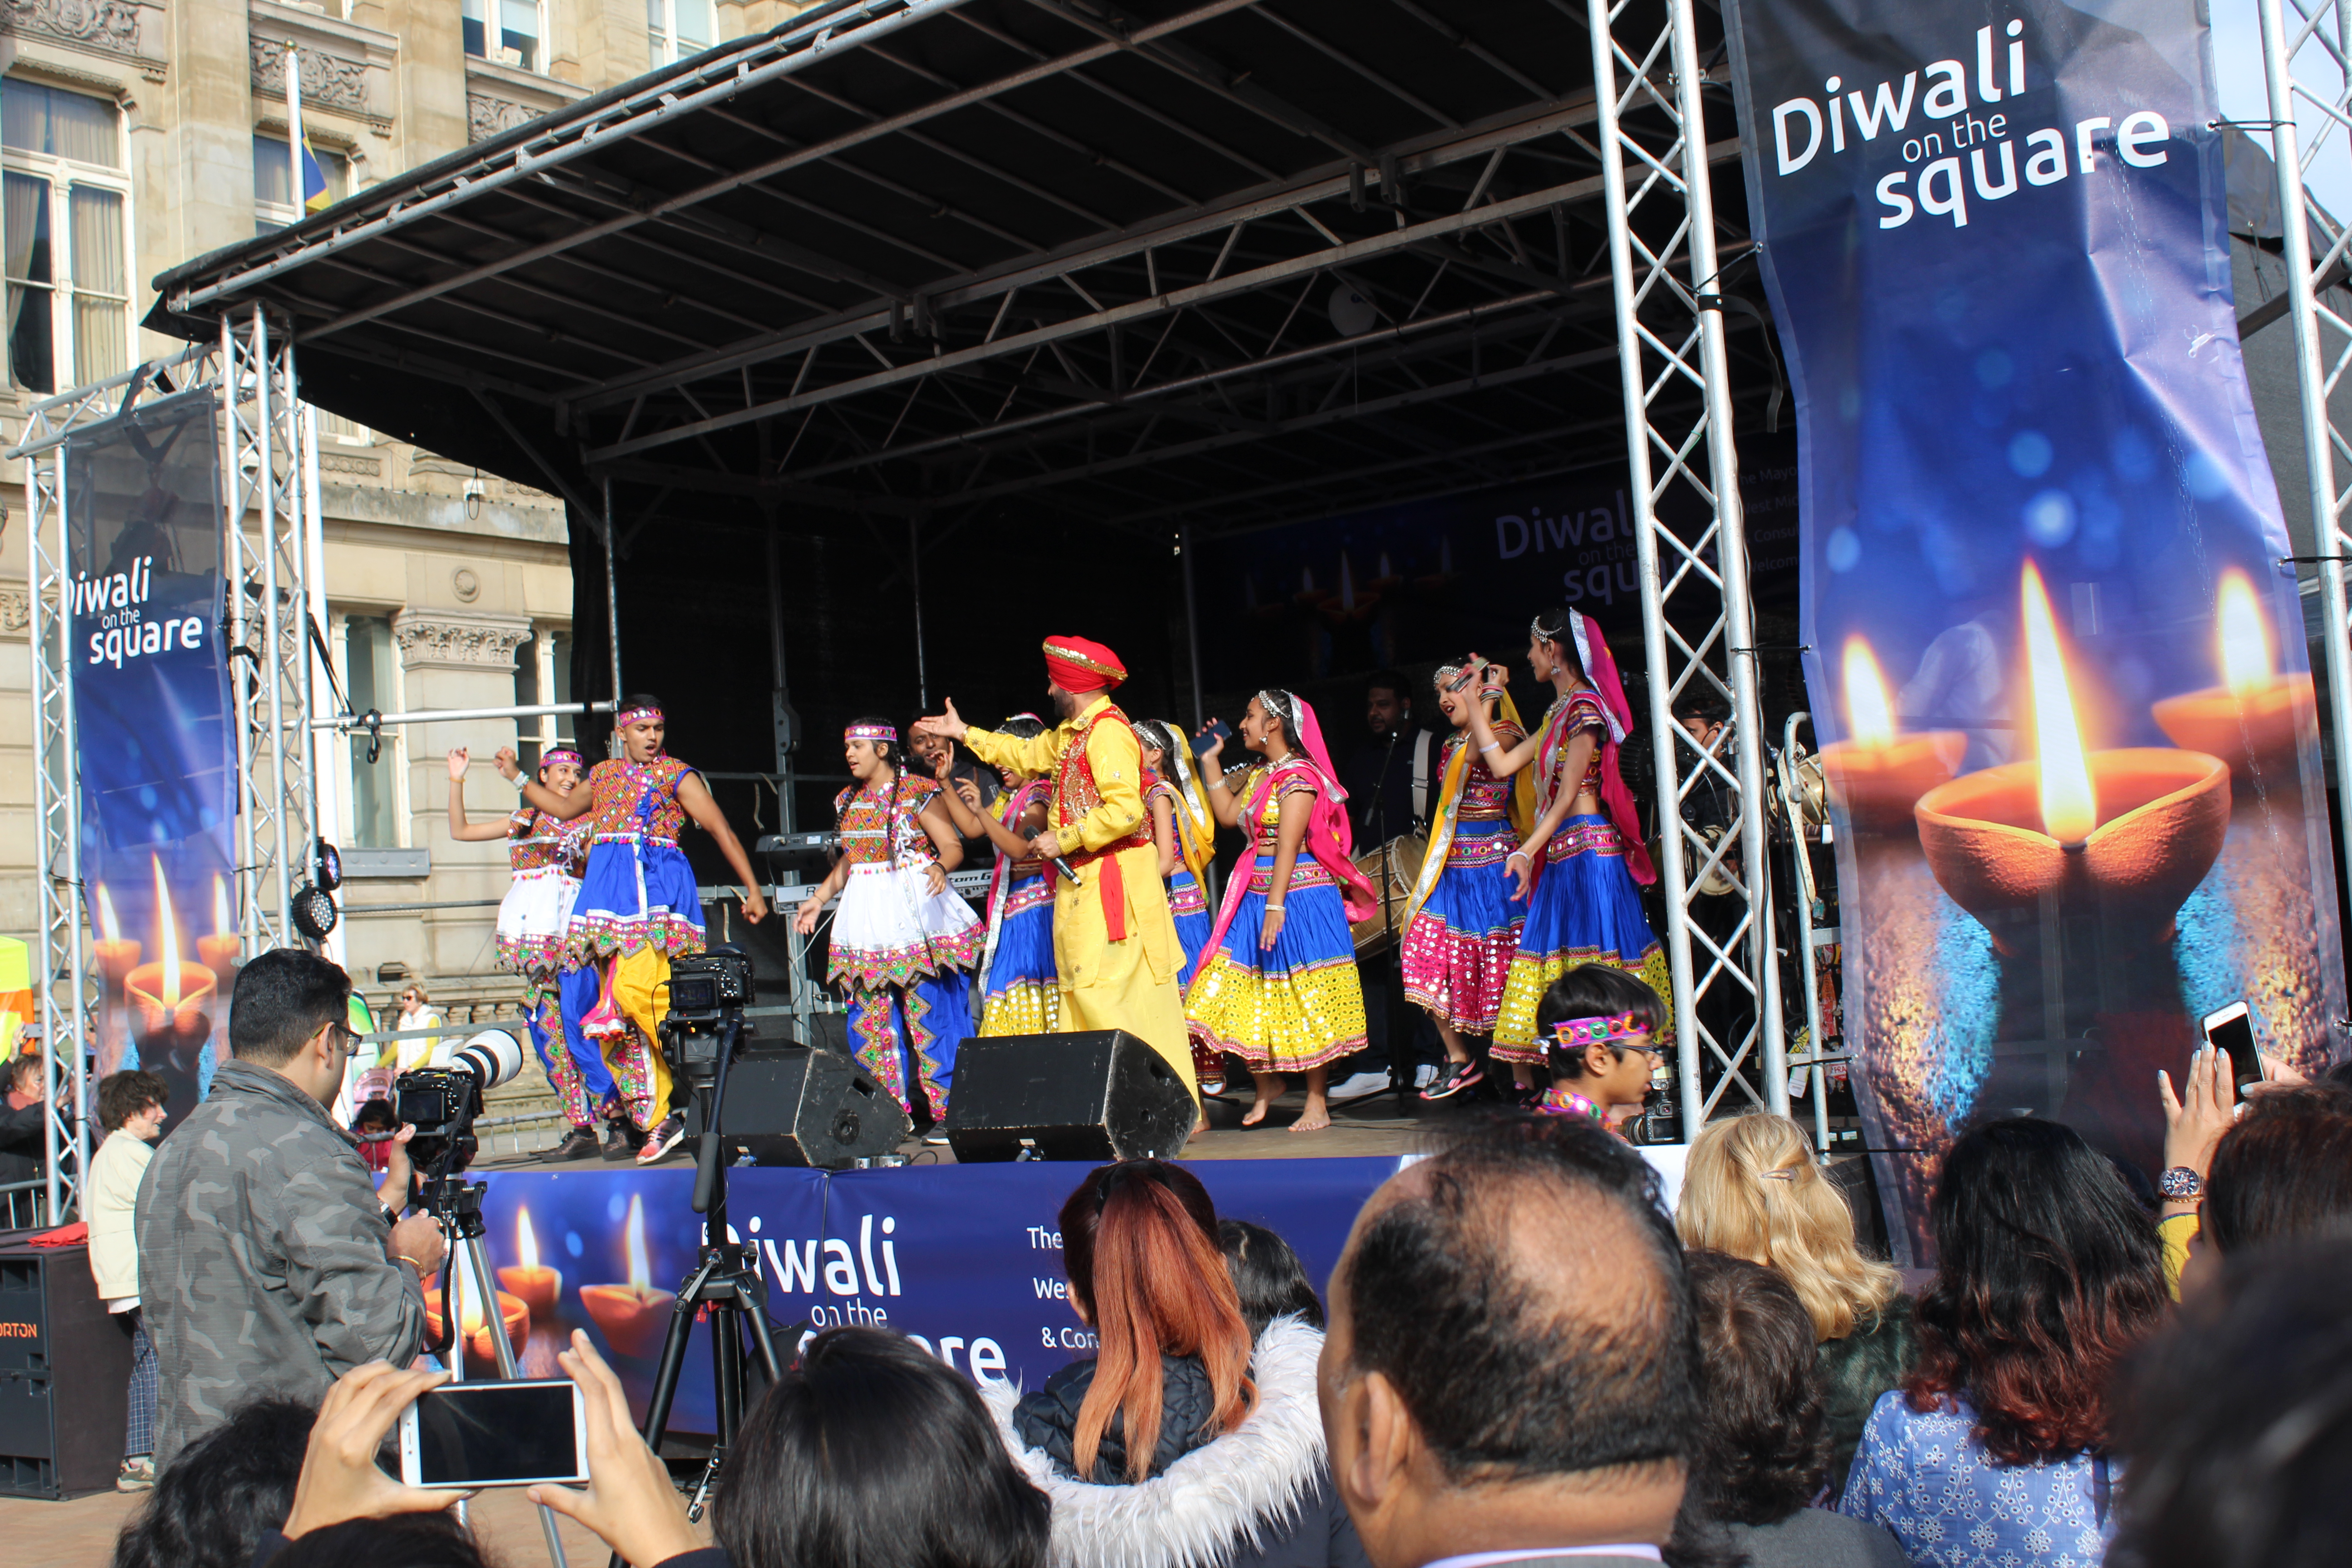 Diwali on the Square - just one of many cultural events and other attractions that help generate more than 131 million visits to the West Midlands each year